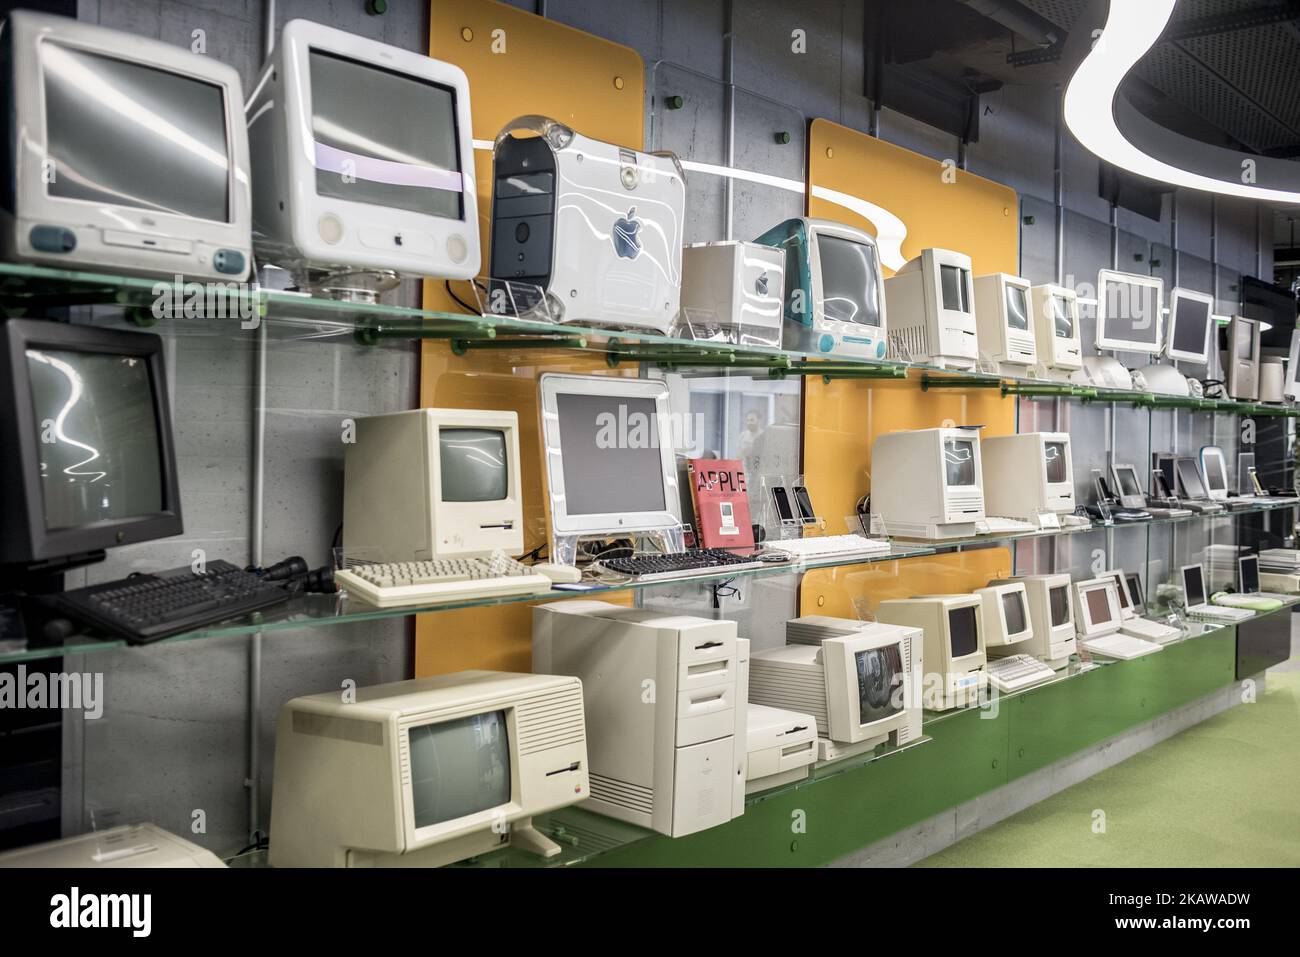 Macintosh models exhibited at MacPaw's Ukrainian Apple Museum in Kiev, Ukraine on January 26, 2017. Ukrainian developer MacPaw has opened Apple hardware museum at the company’s office in Kiev. The collection has more than 70 original Macintosh models dated from 1981 to 2017. (Photo by Oleksandr Rupeta/NurPhoto) Stock Photo